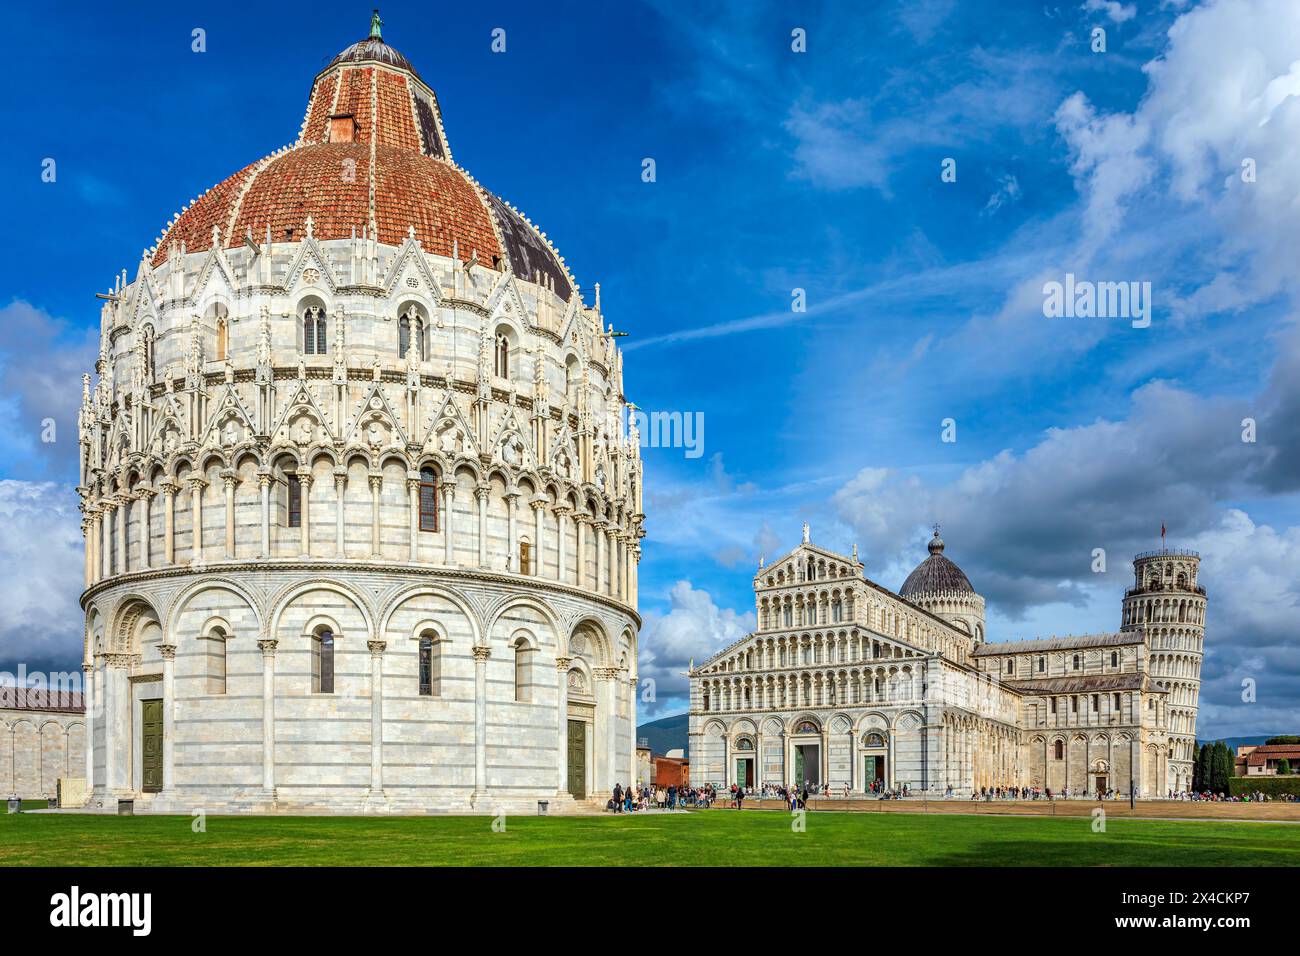 The city of Pisa historic plaza with the Pisa Baptistery, Cathedral, and the Leaning Tower. Photo taken on 22nd of October 2023 in Pisa, Tuscany regio Stock Photo